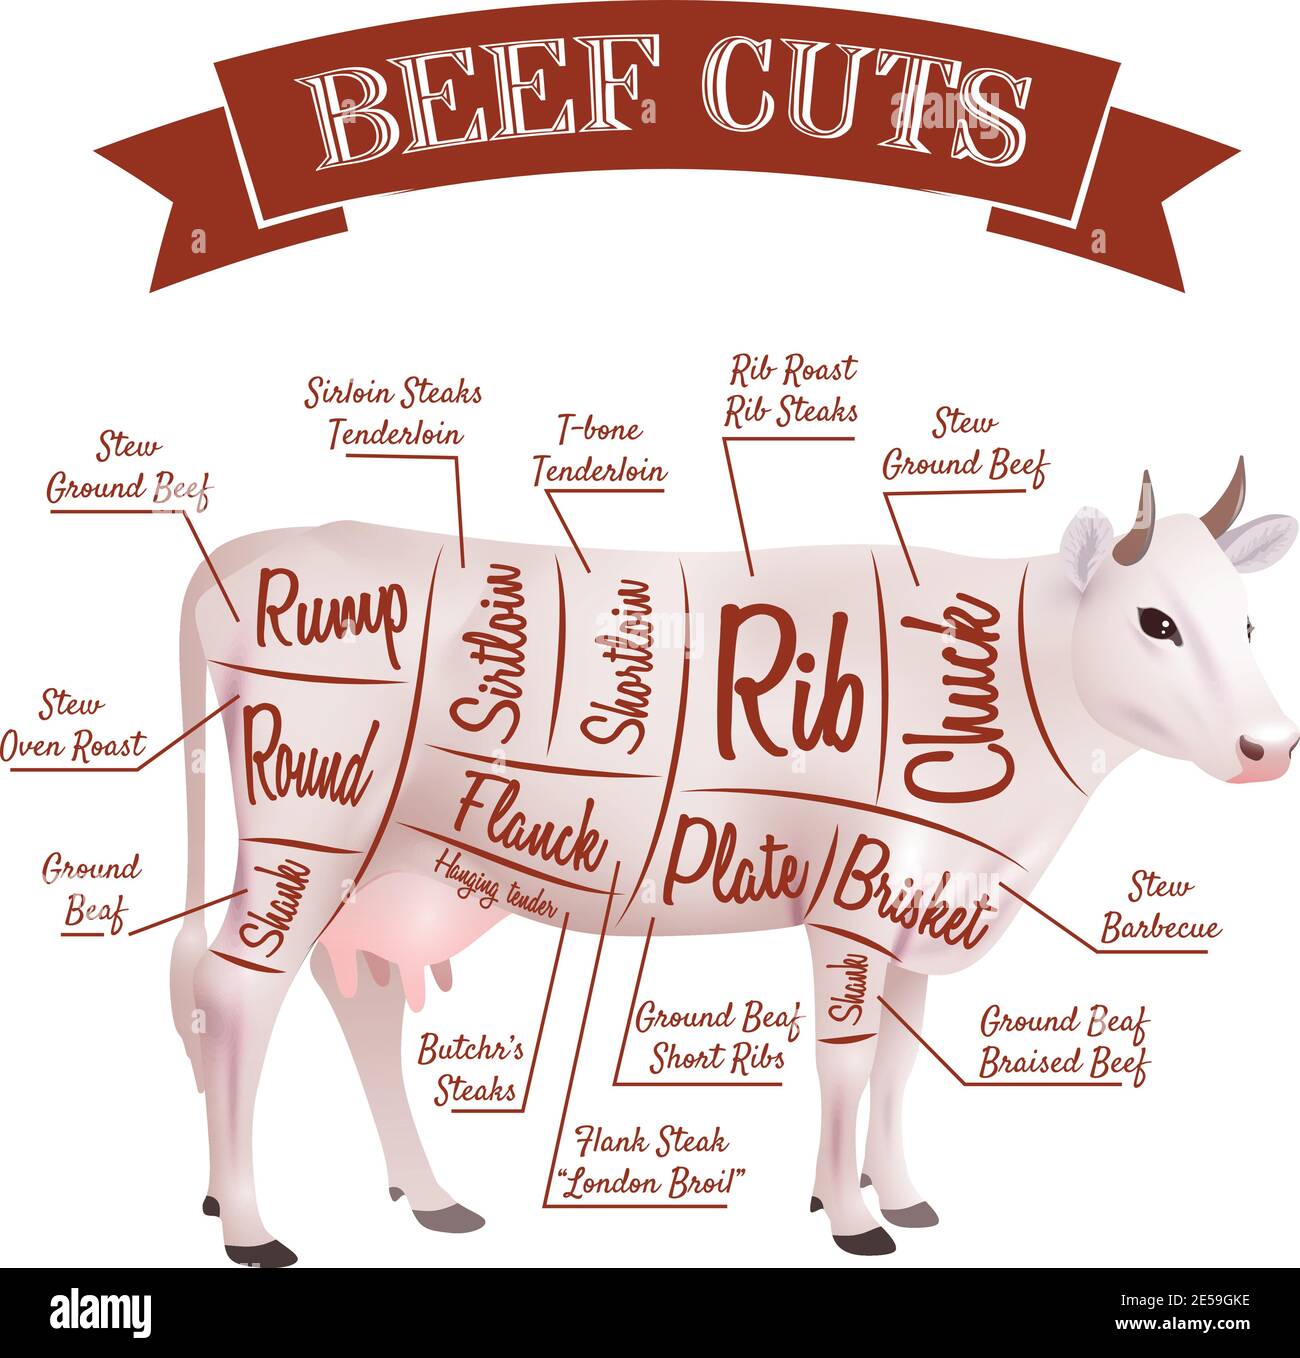 Parts Of Beef Cuts